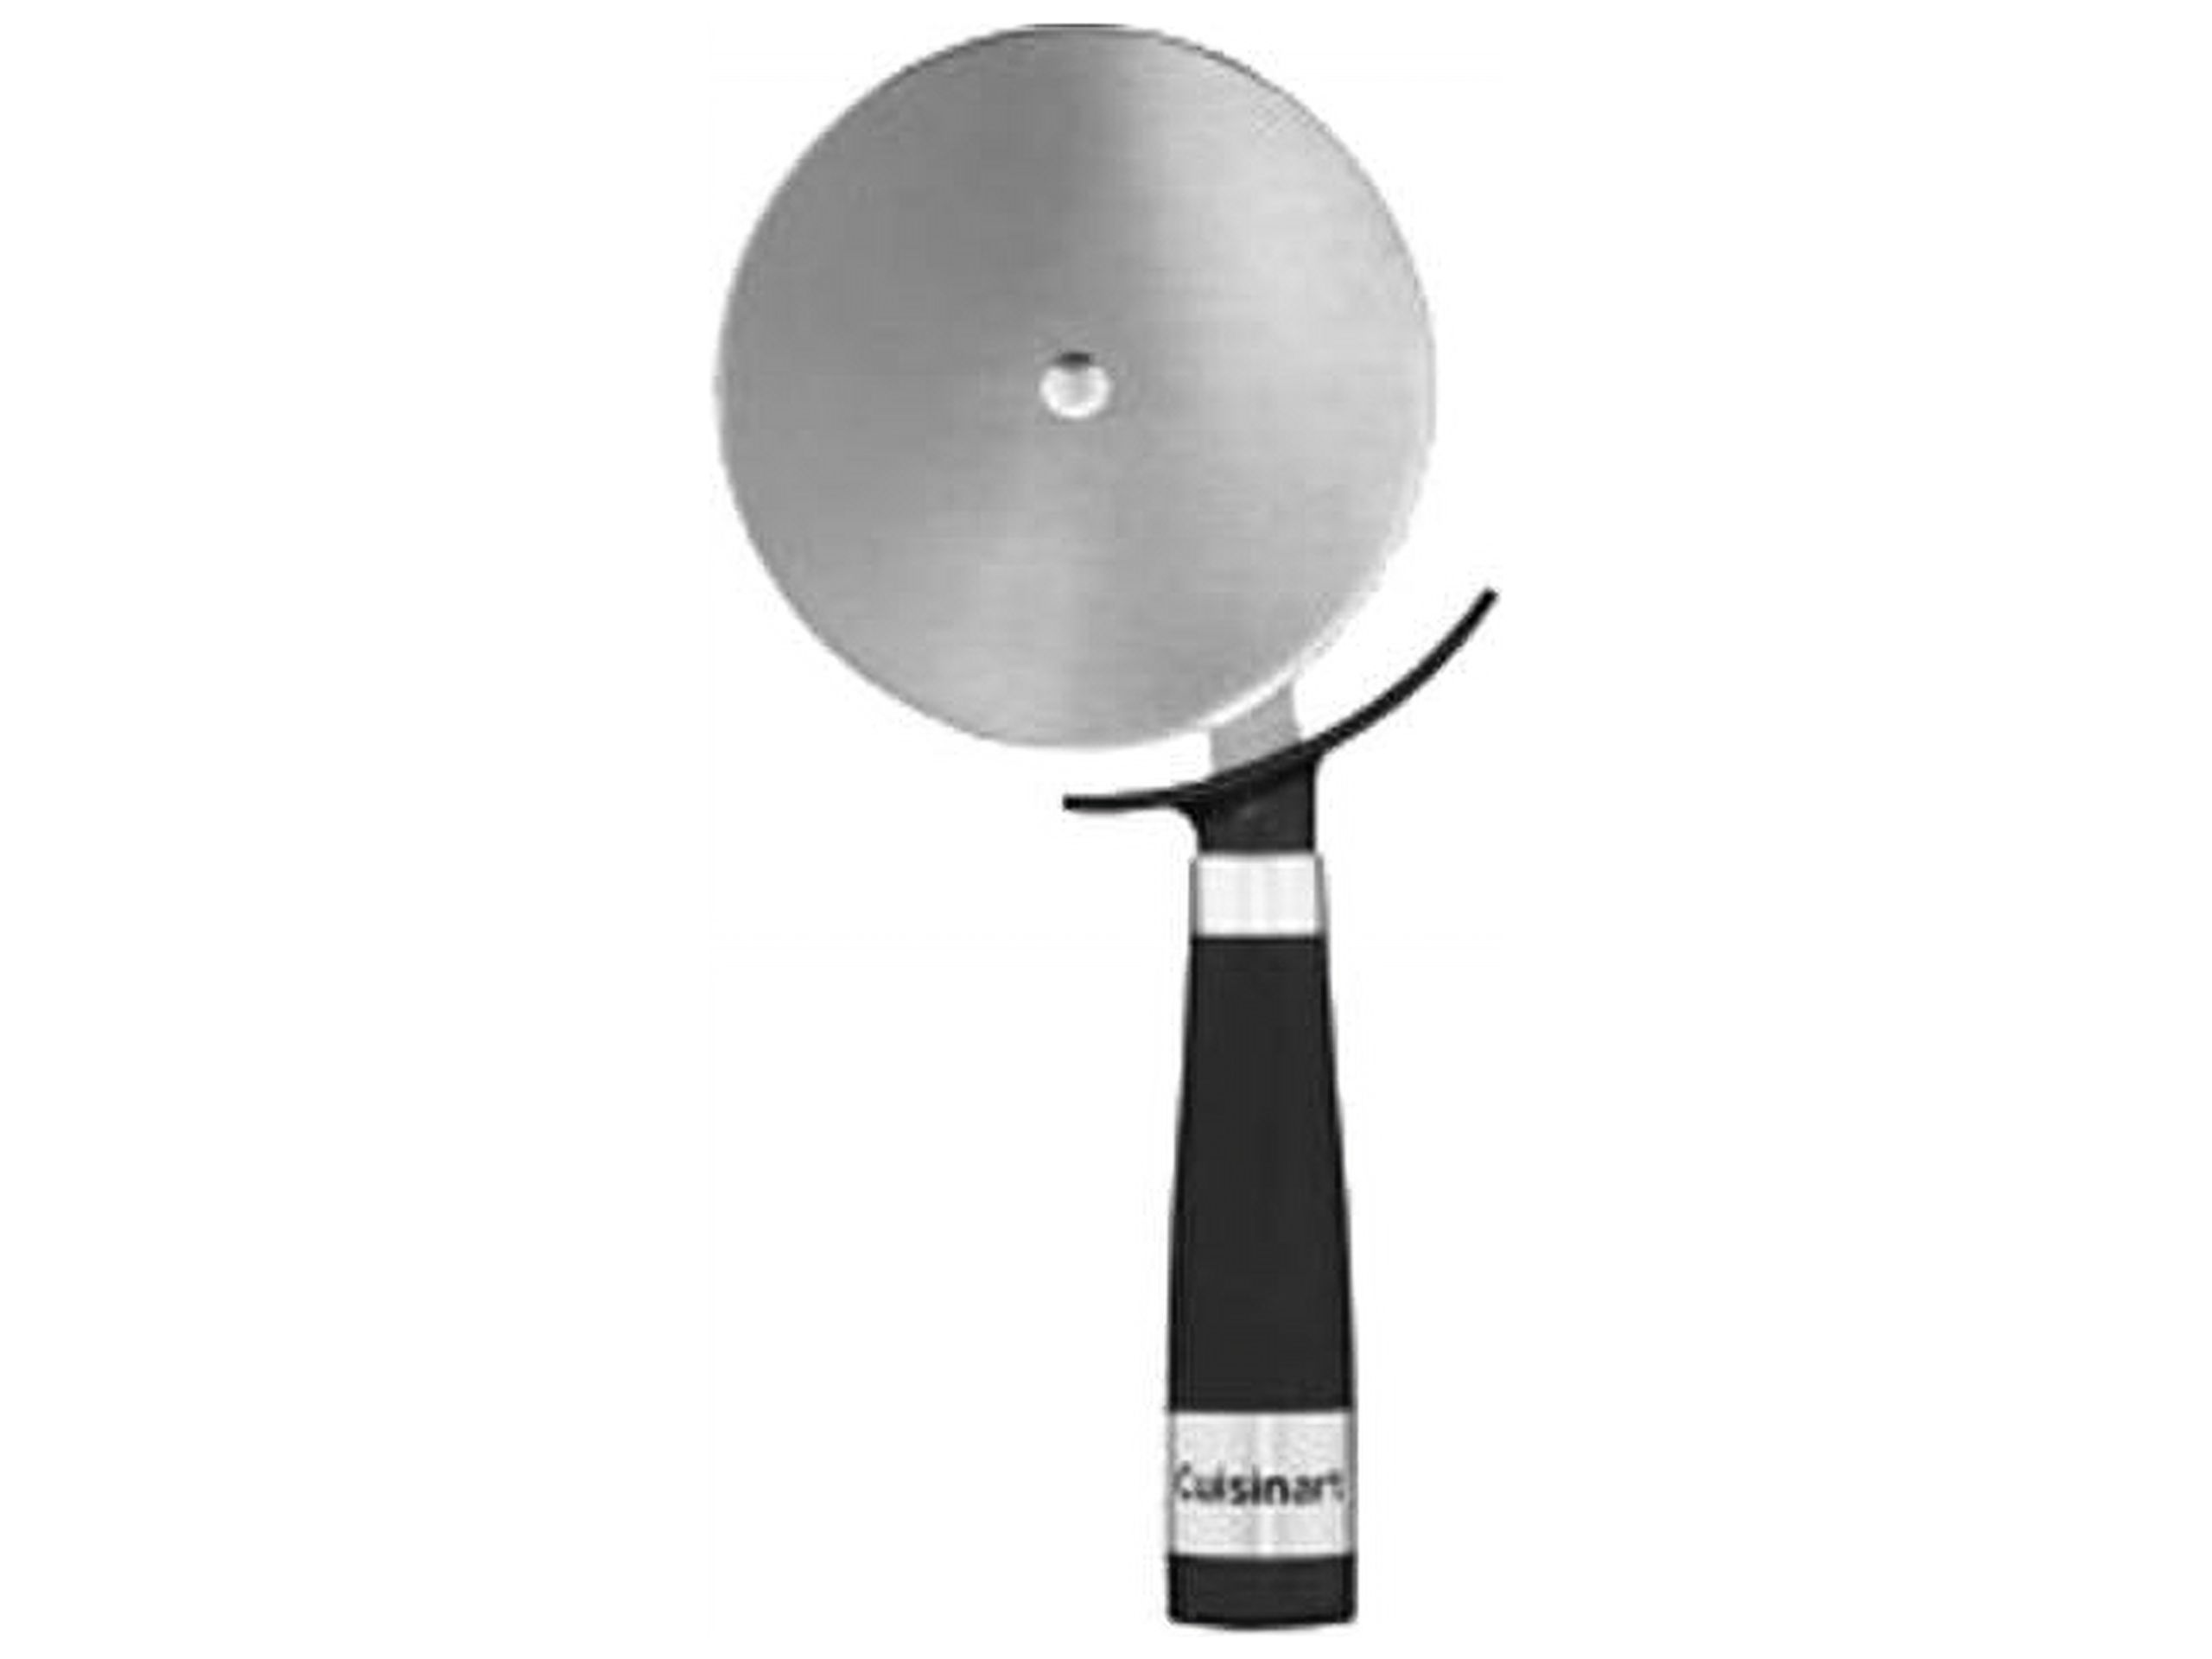 Cuisinart CTG-04-PC Pizza Cutter with Barrel Handle - image 1 of 2